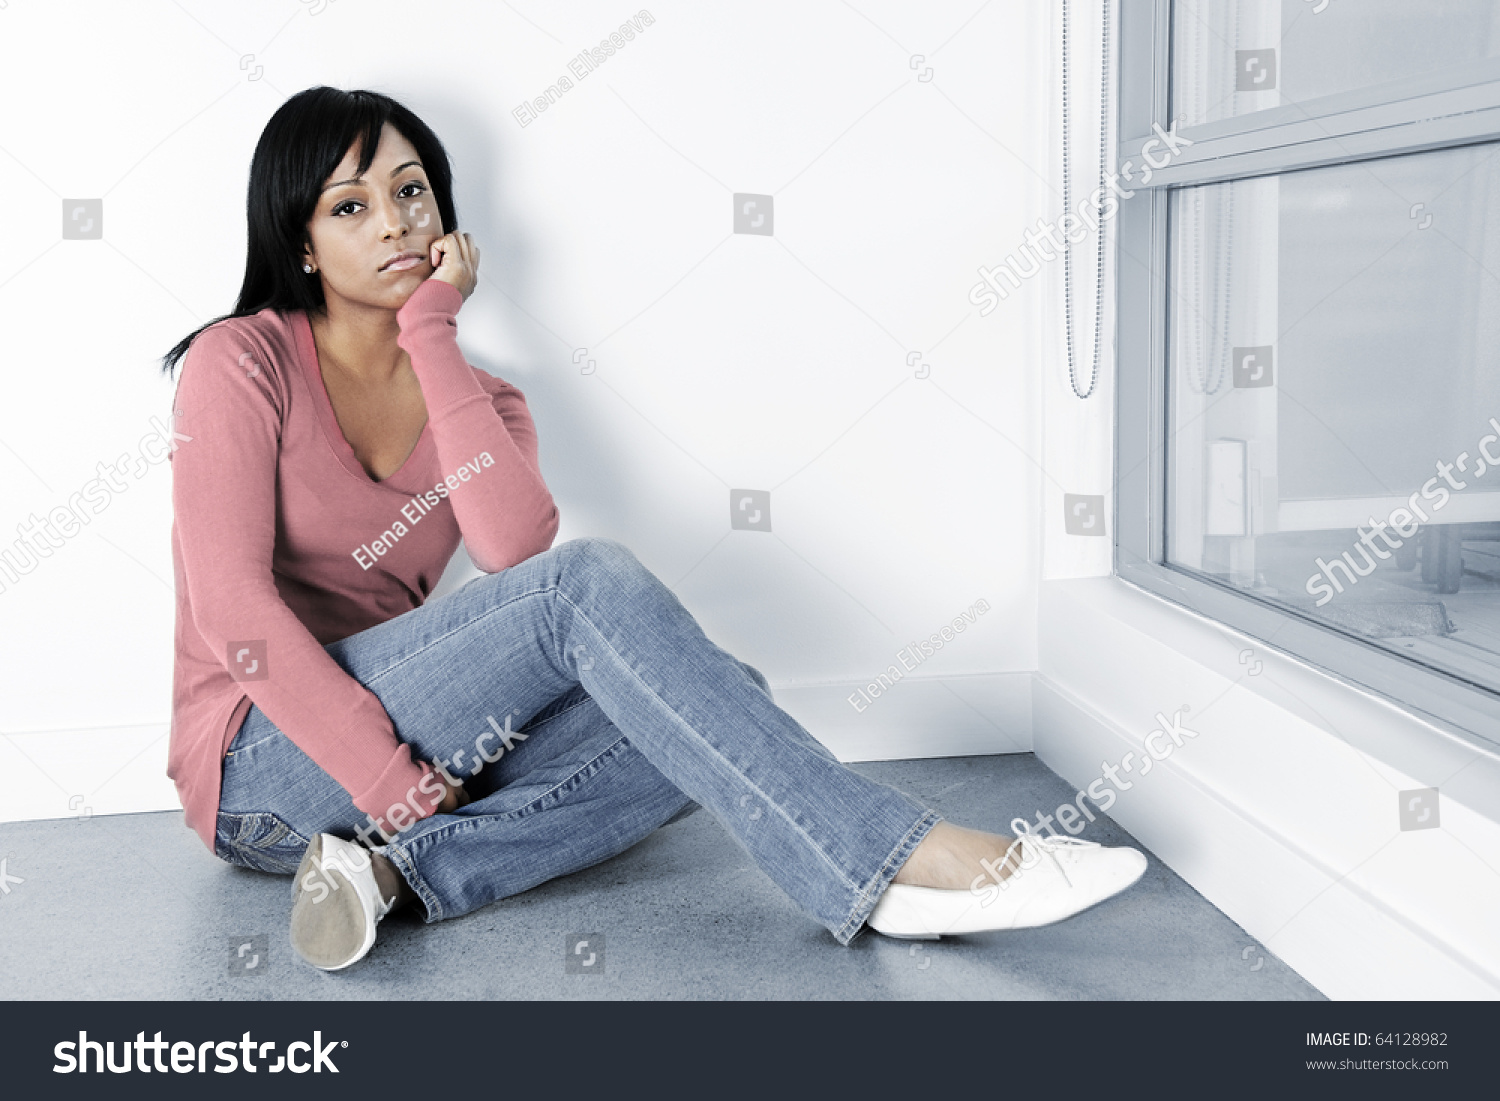 Depressed Black Woman Sitting On The Floor Against Wall Stock Photo ...